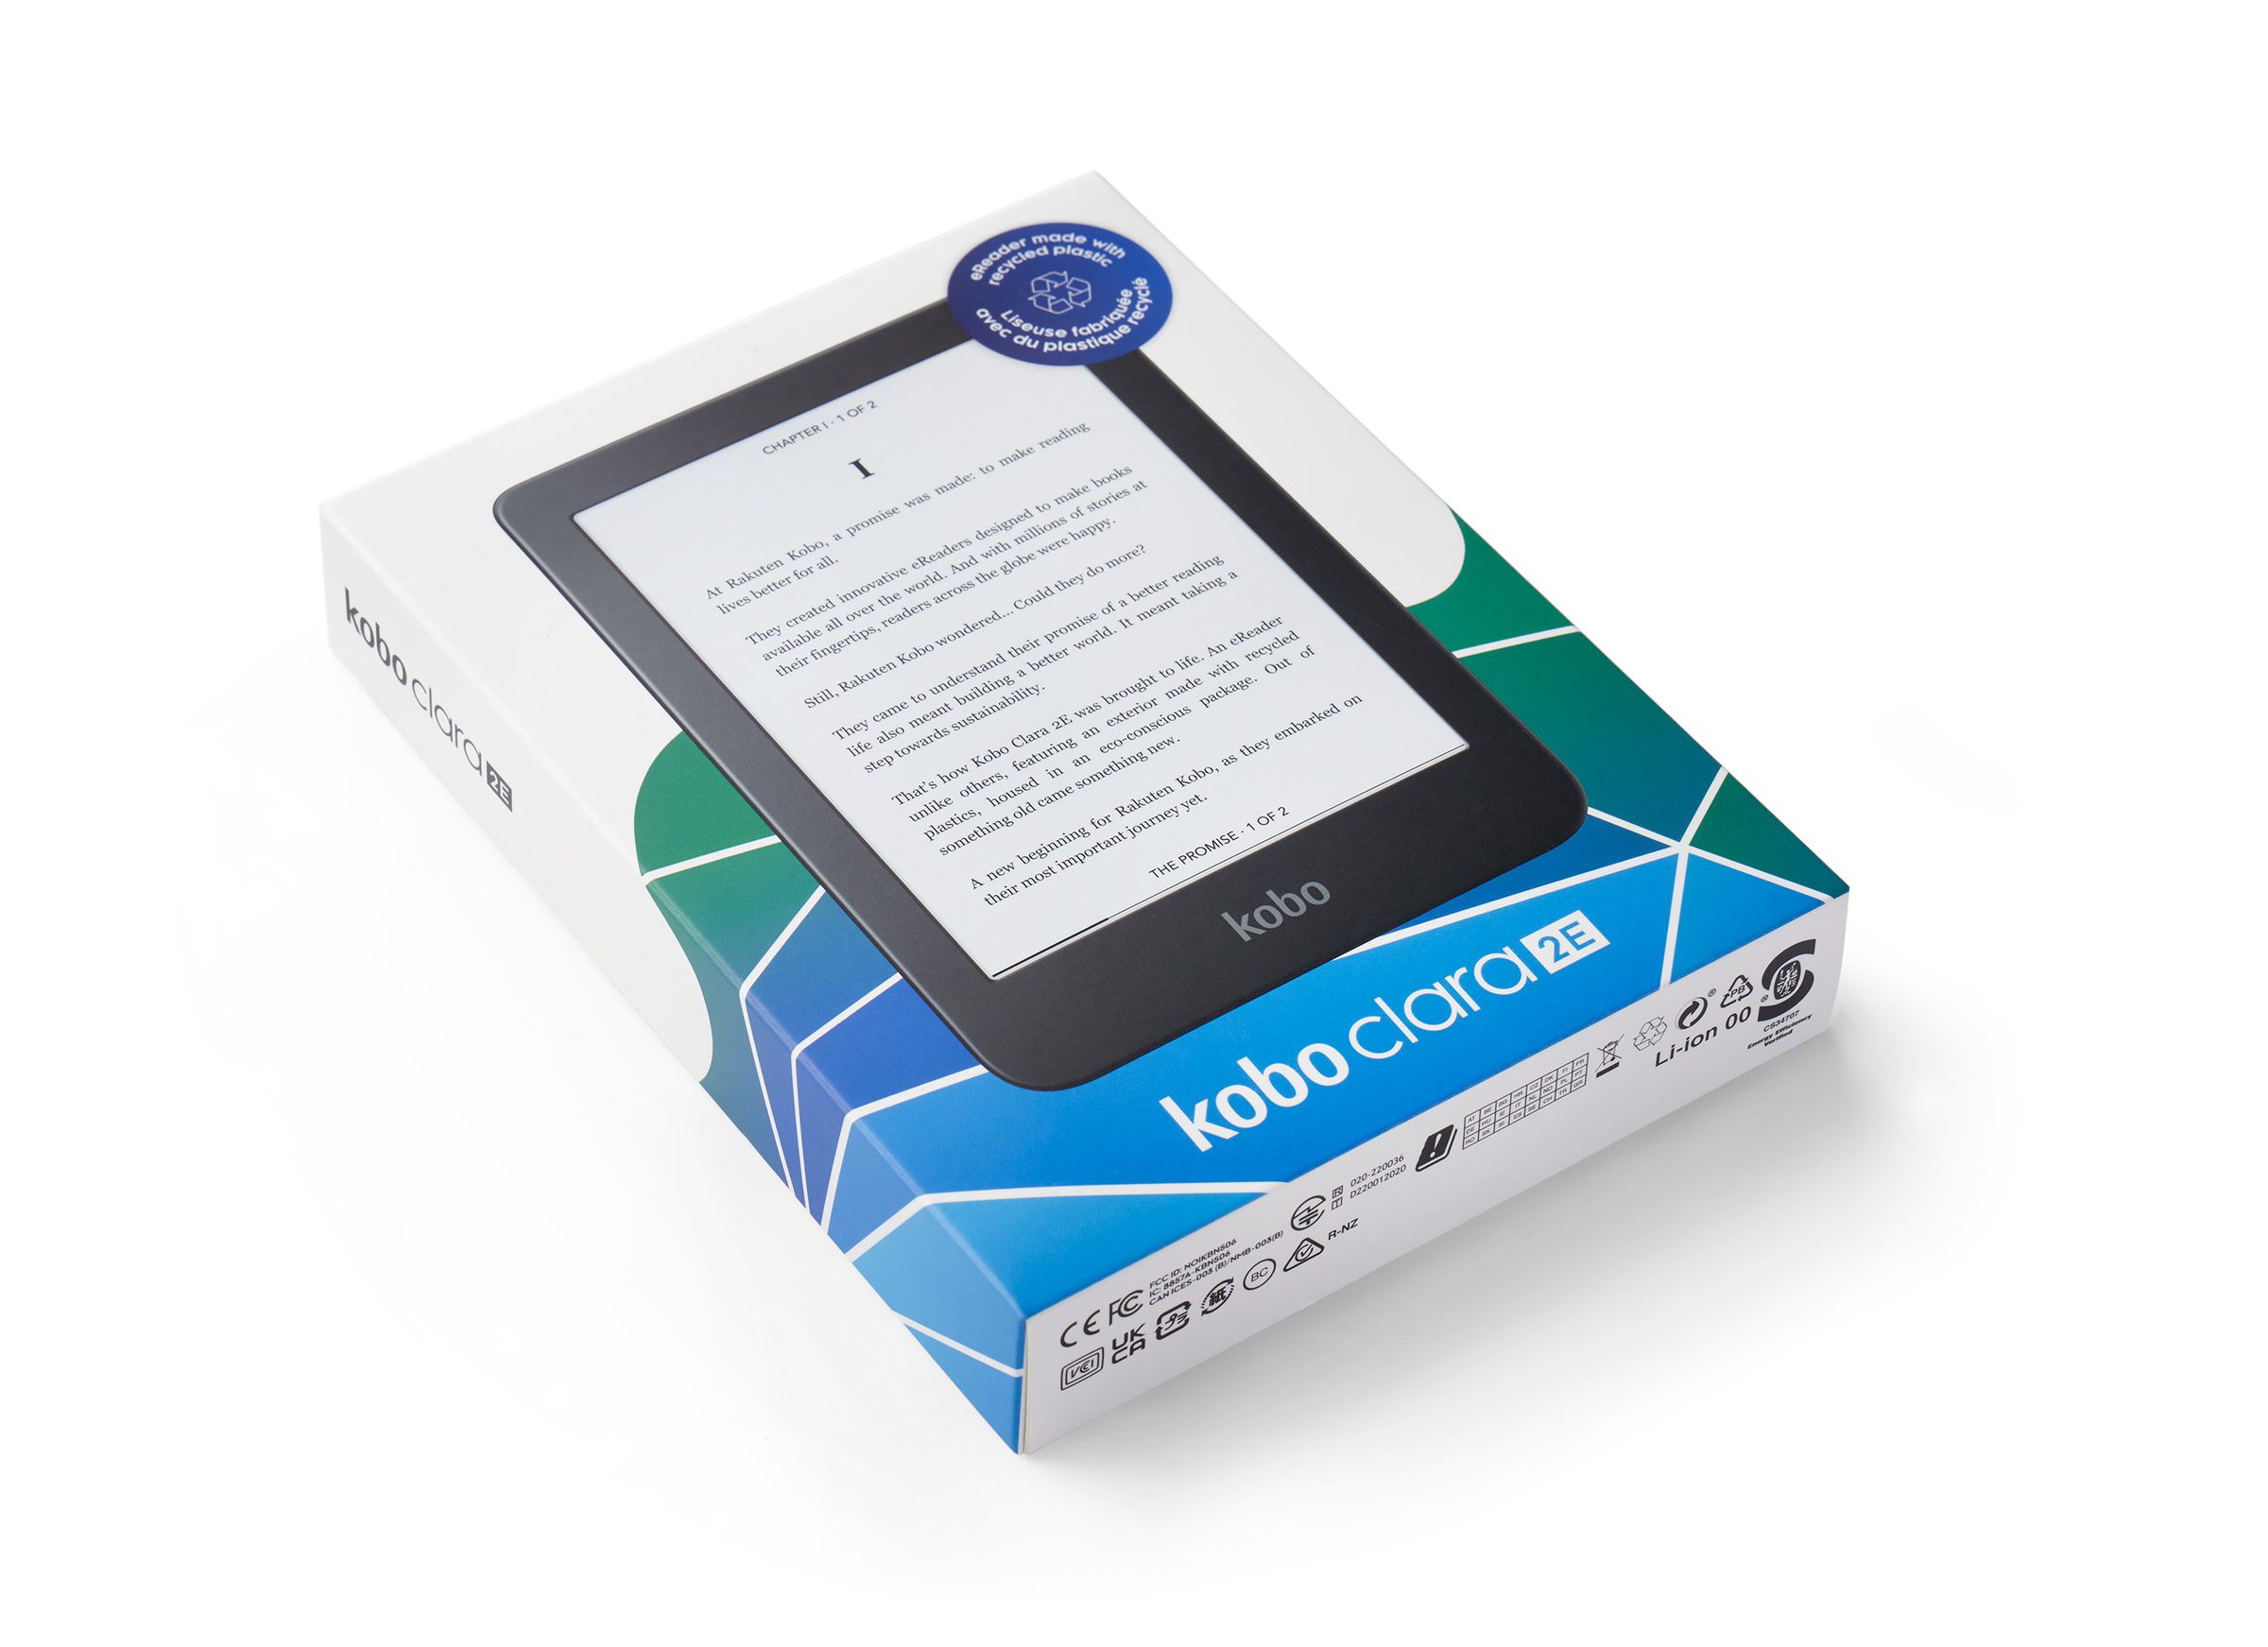 The new Kobo Clara 2E ships in more eco-friendly packaging.